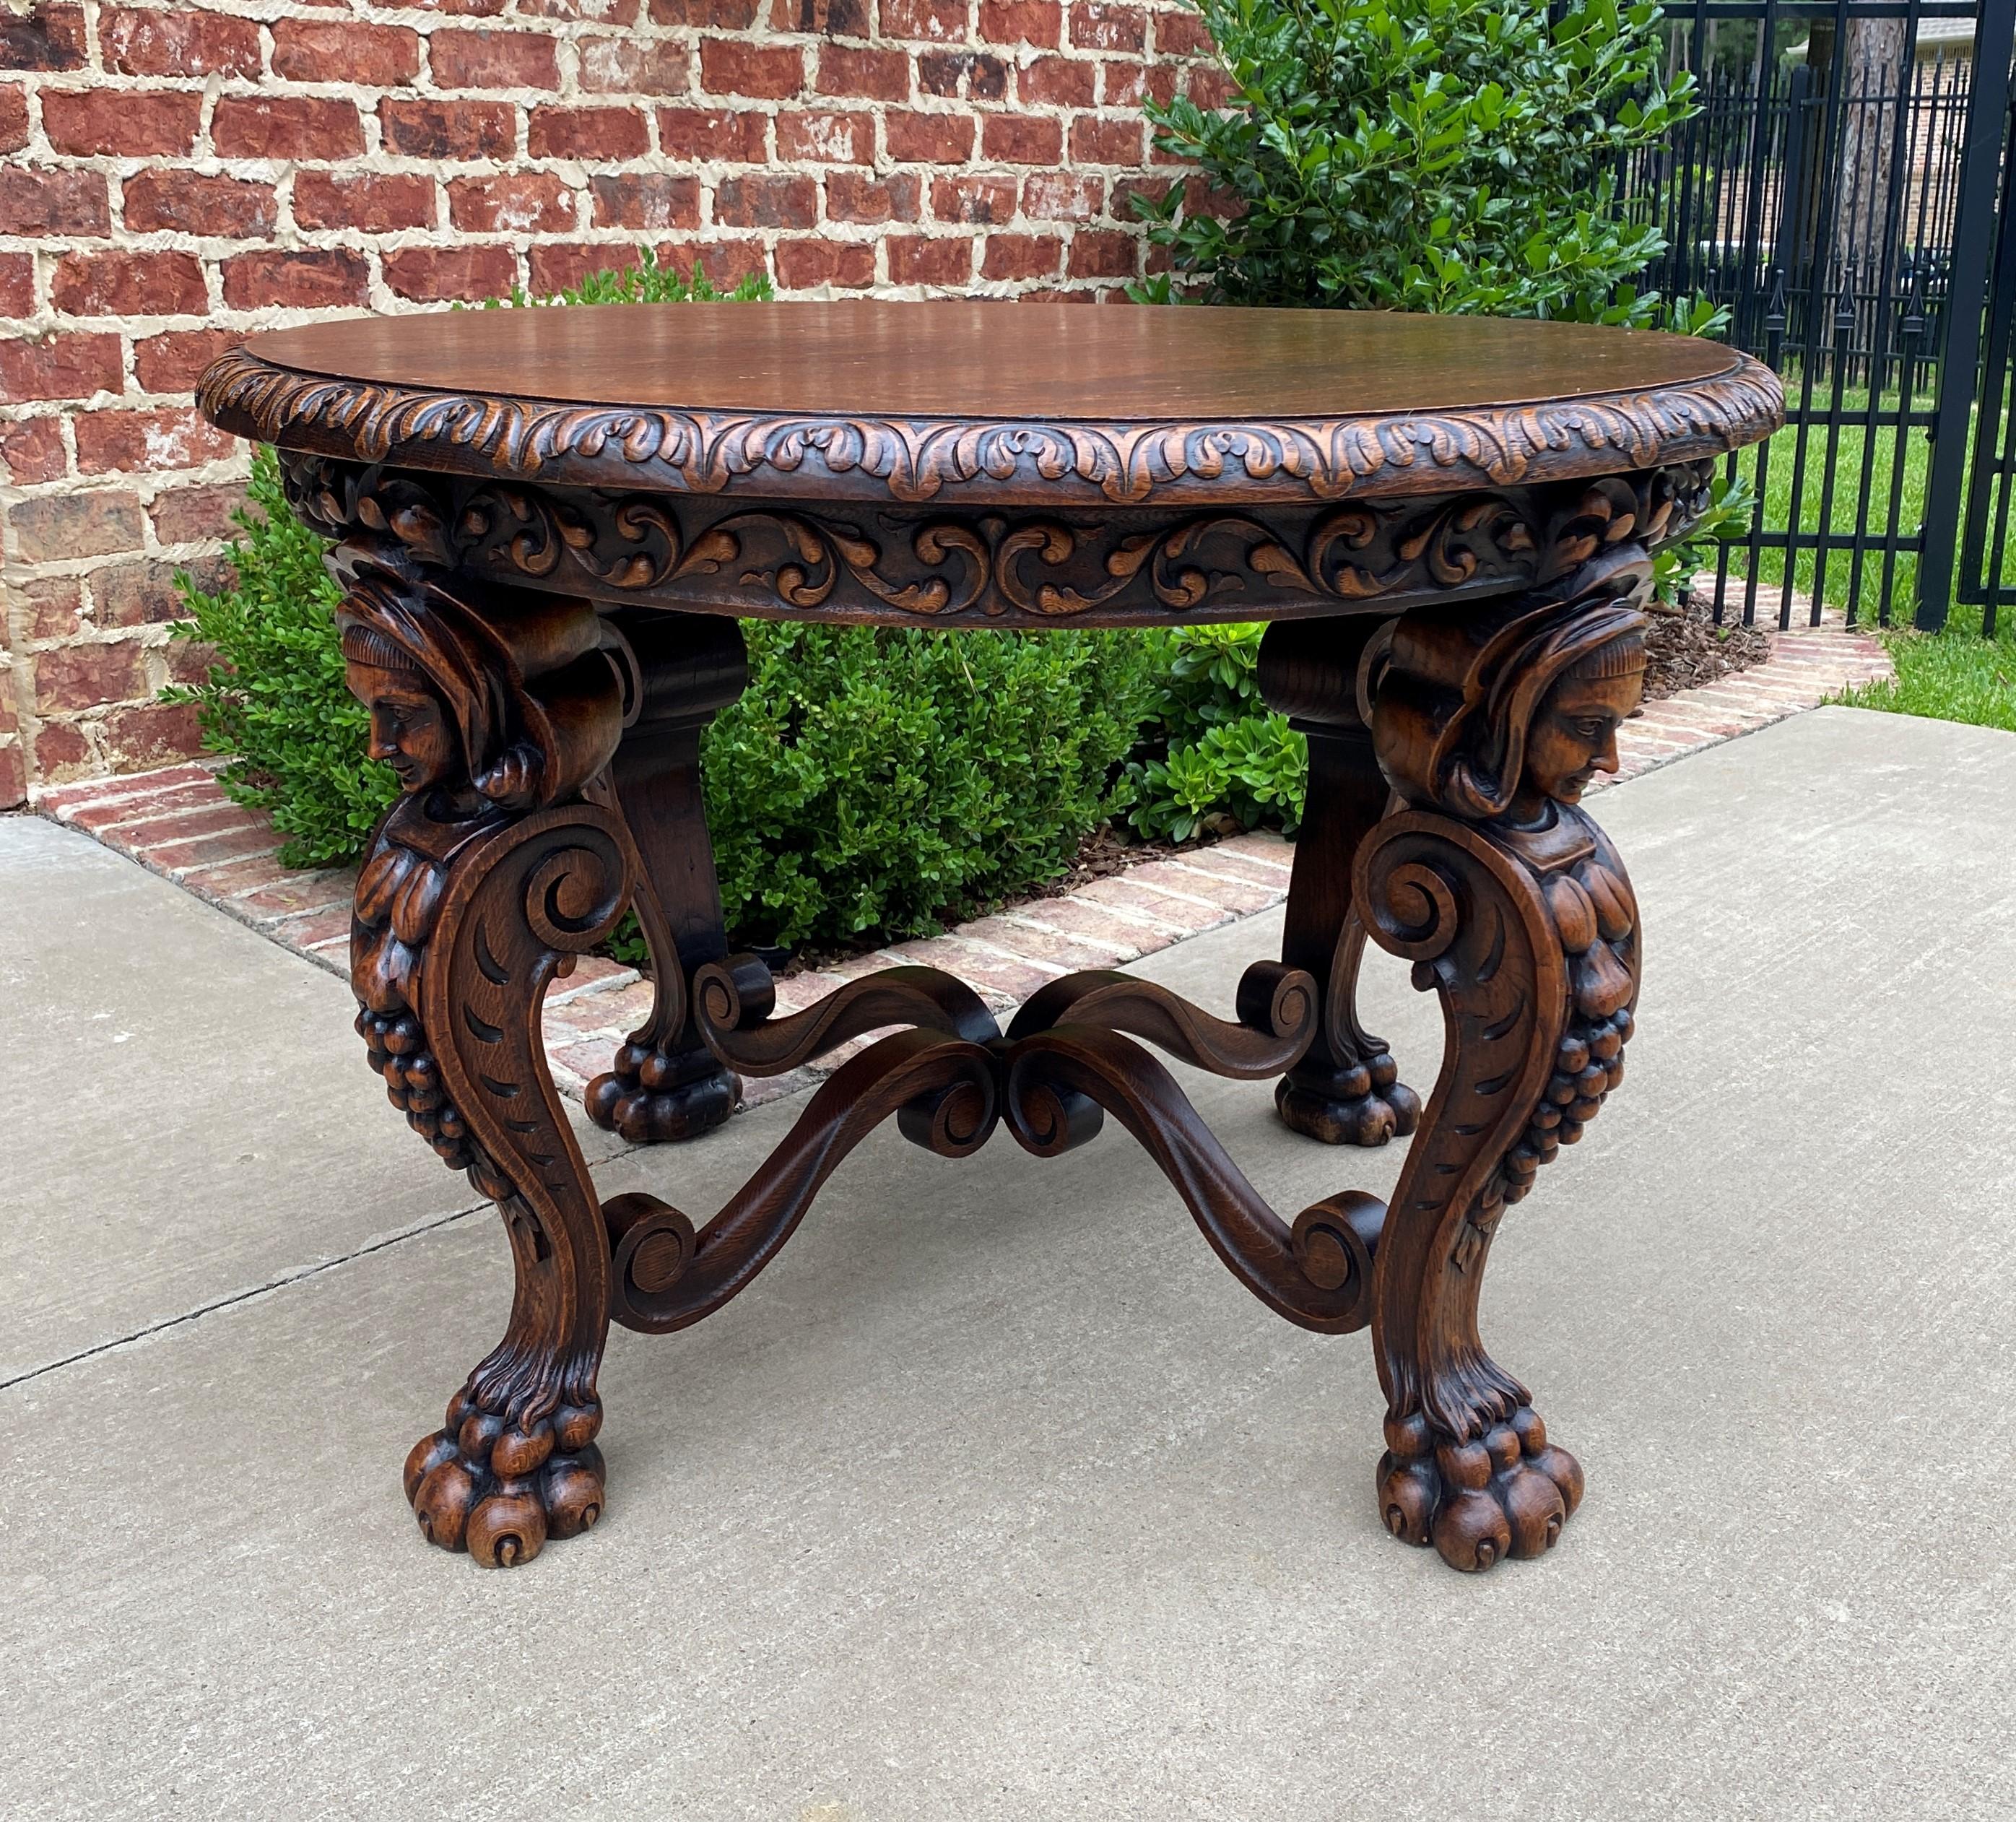 Antique French Round Table Entry Sofa Foyer Coffee Table Renaissance Revival Oak In Good Condition For Sale In Tyler, TX